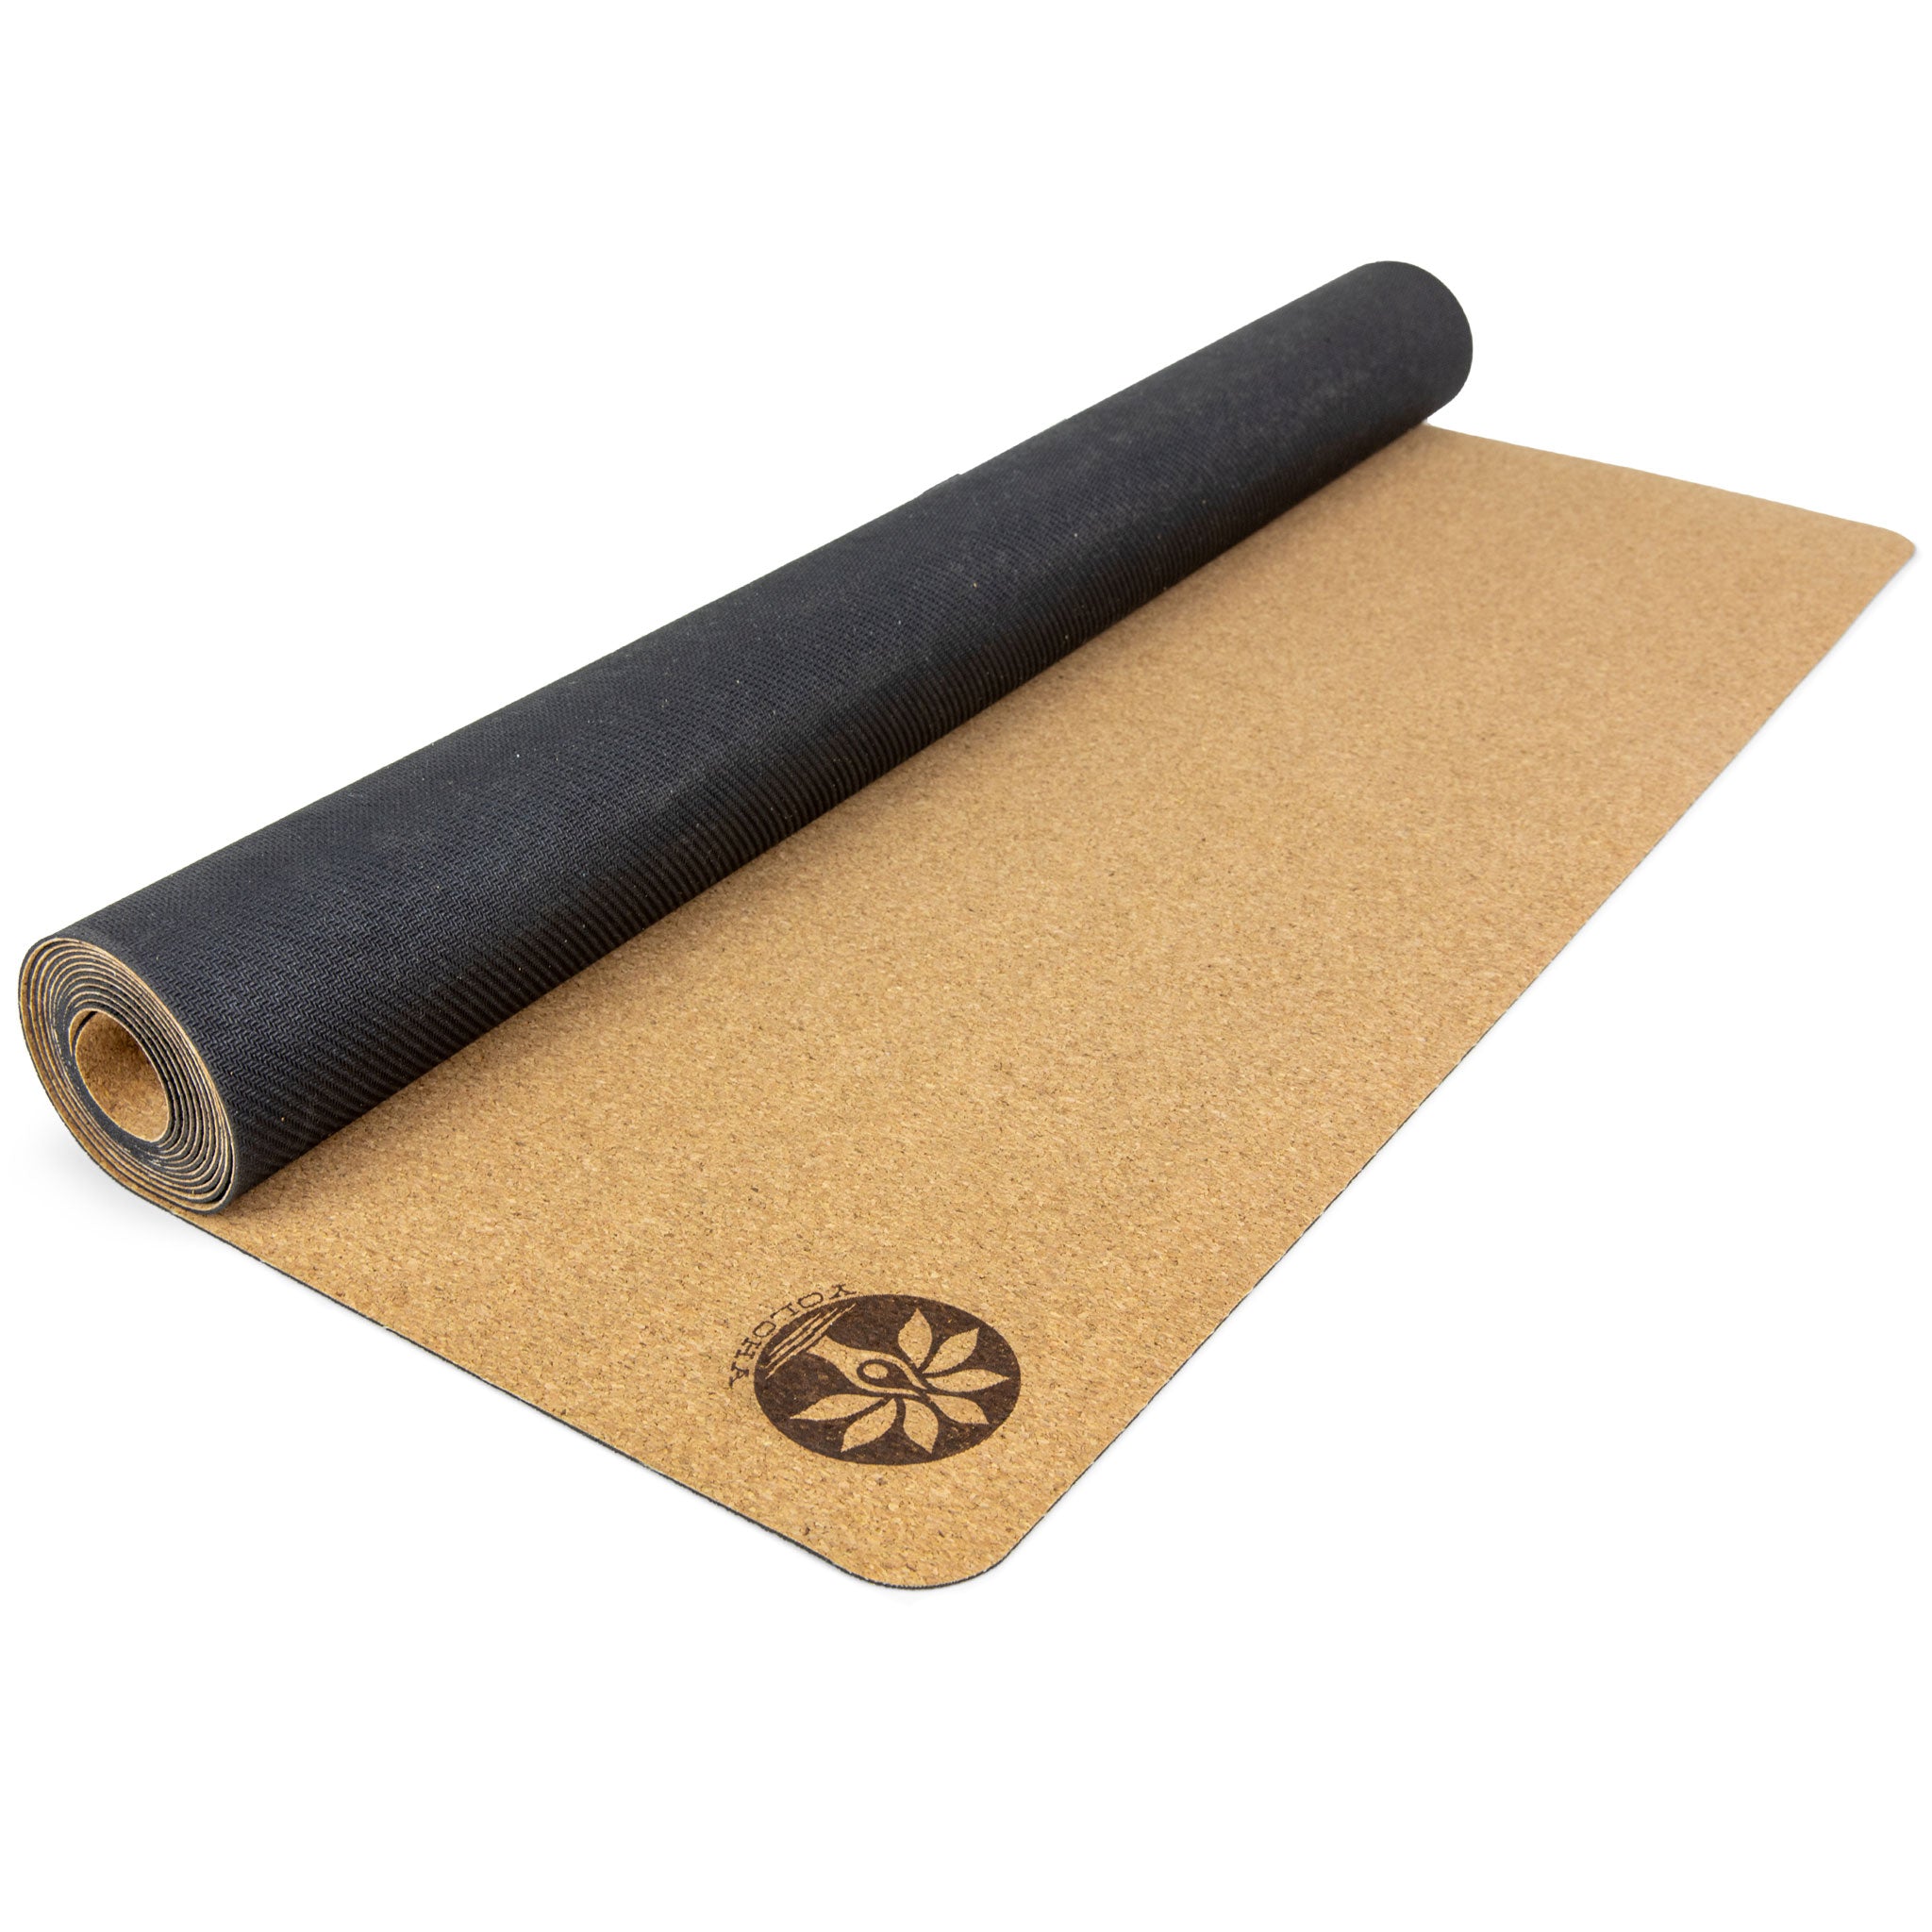 Yoga Mat with Strap - 1.5 mm Thick Foldable Mat Perfect for Exercise